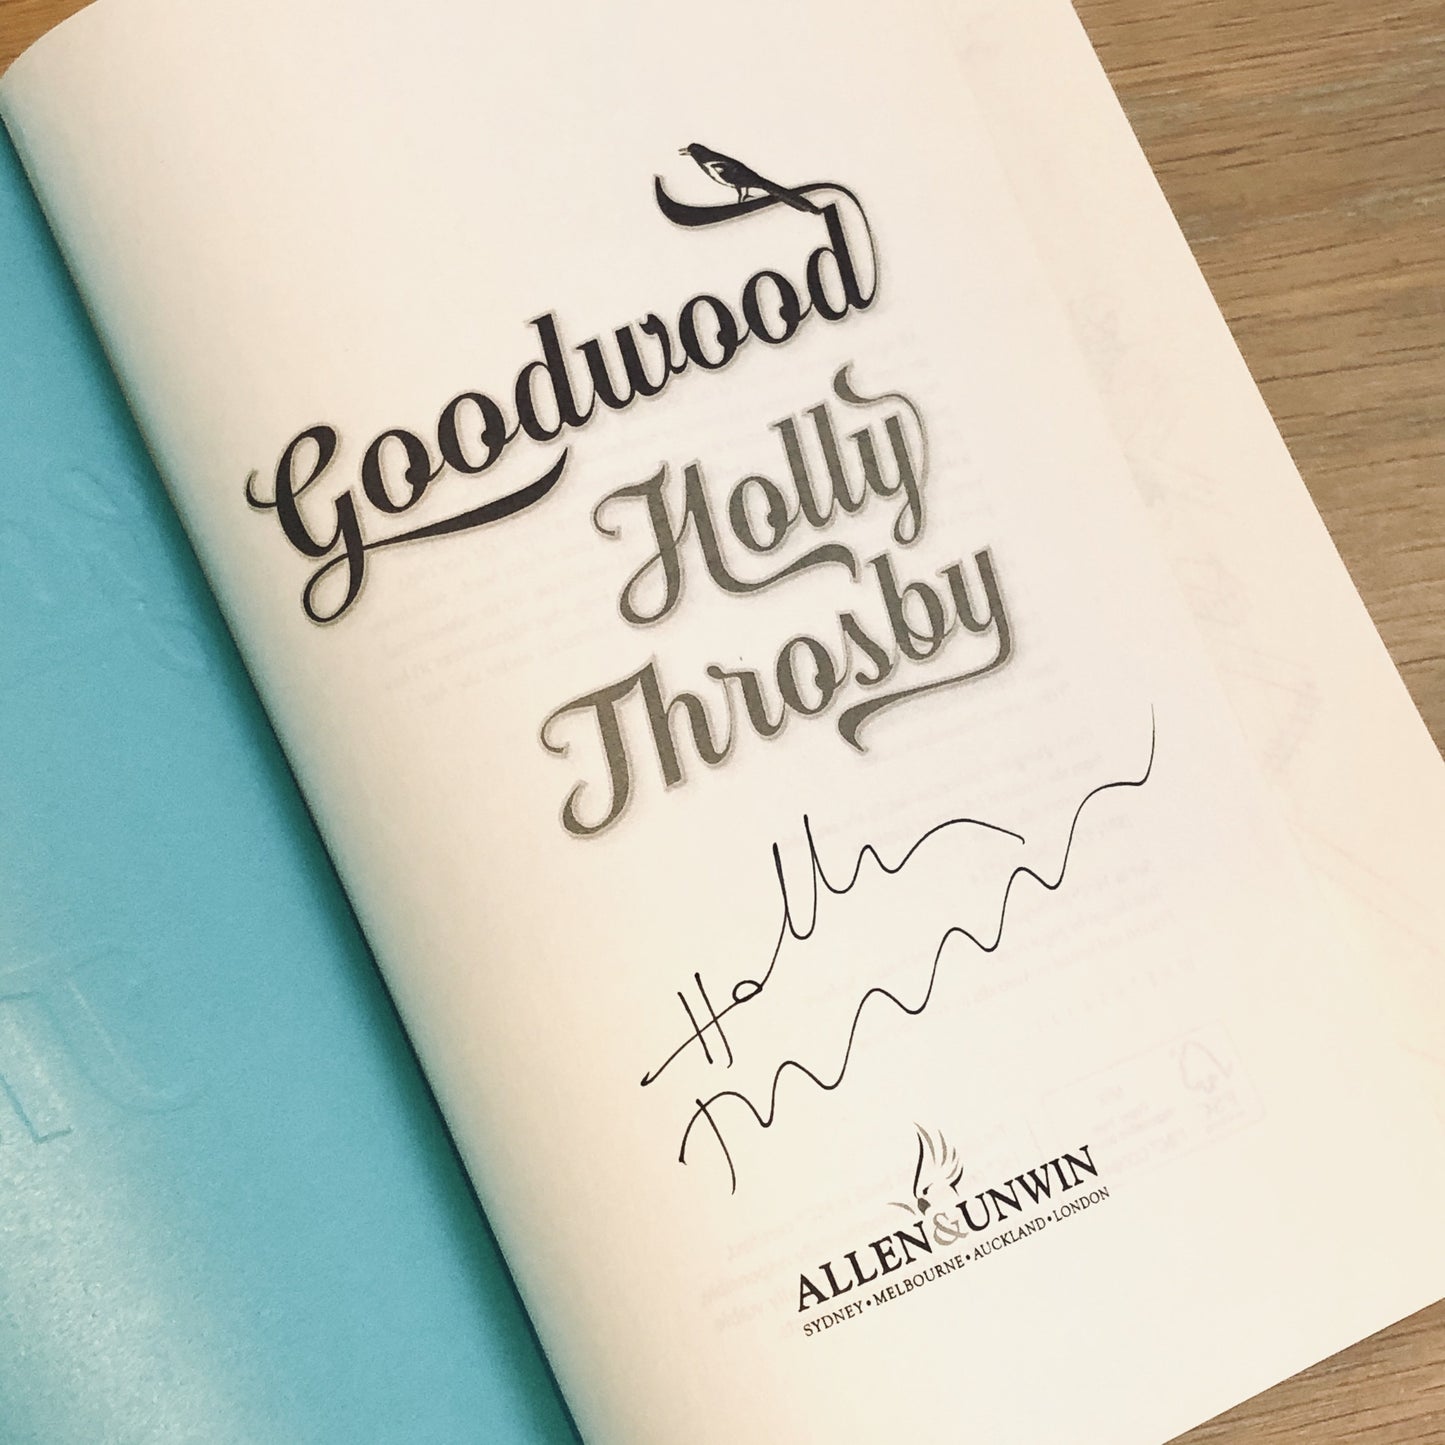 Holly Throsby - Goodwood [Signed Edition]